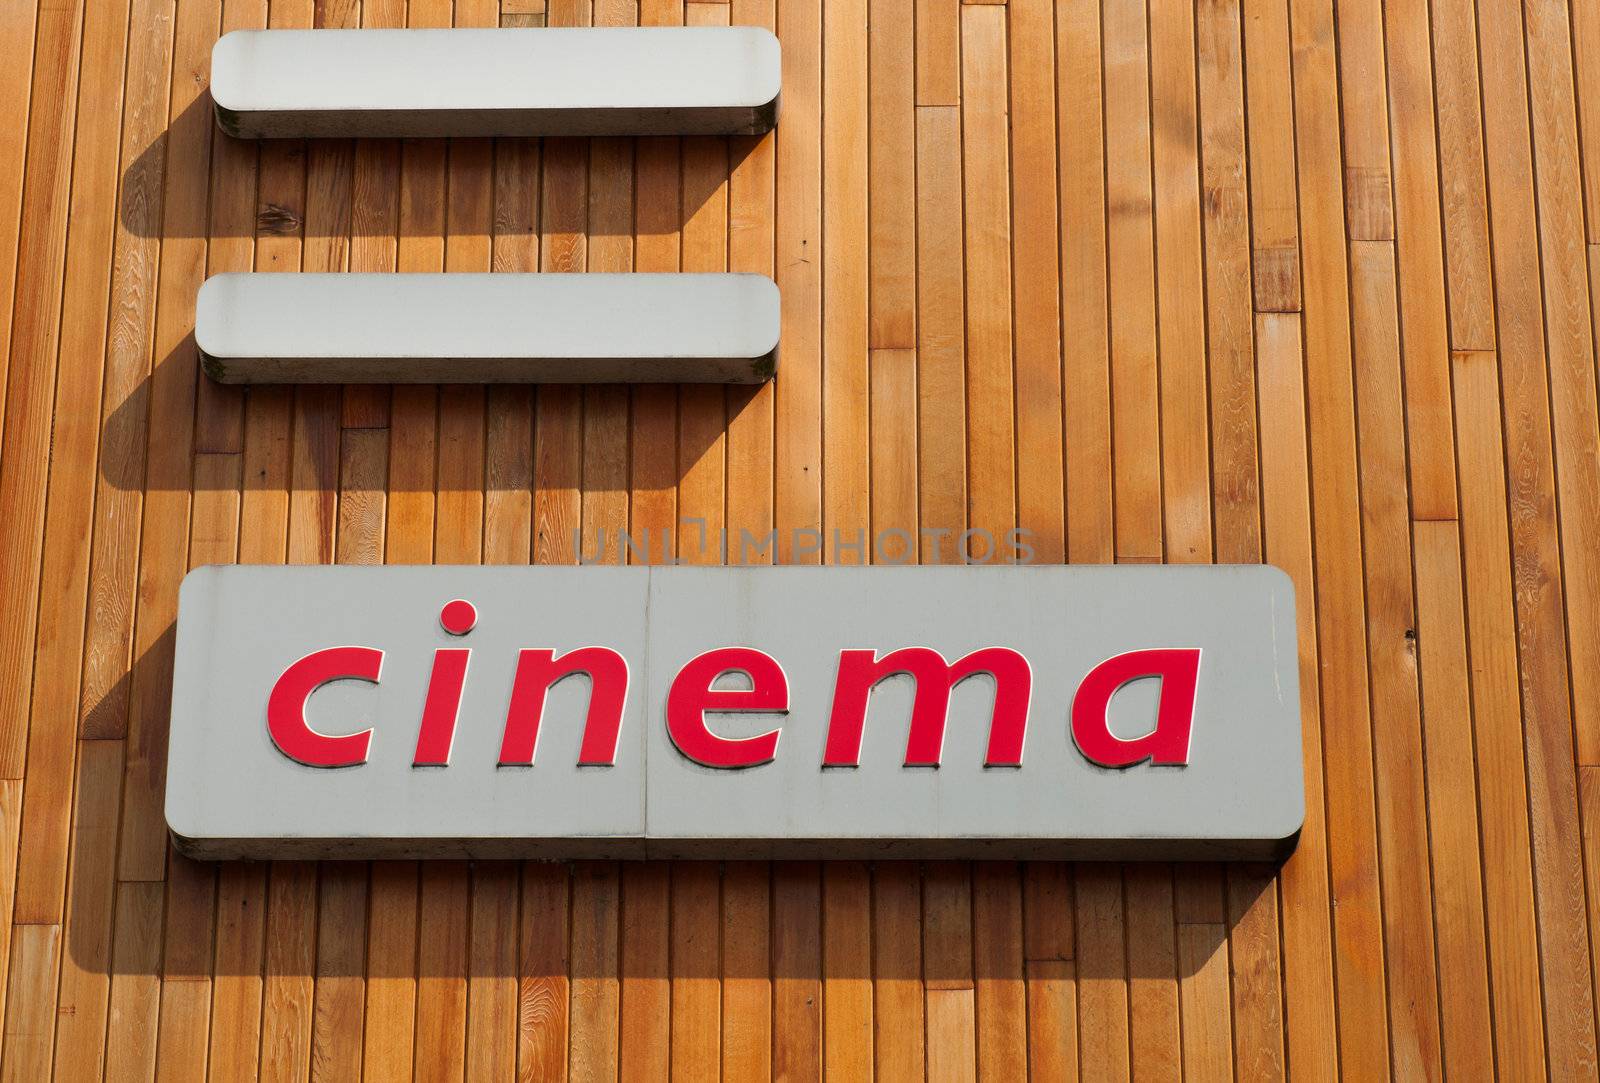 exterior cinema sign on a wooden background